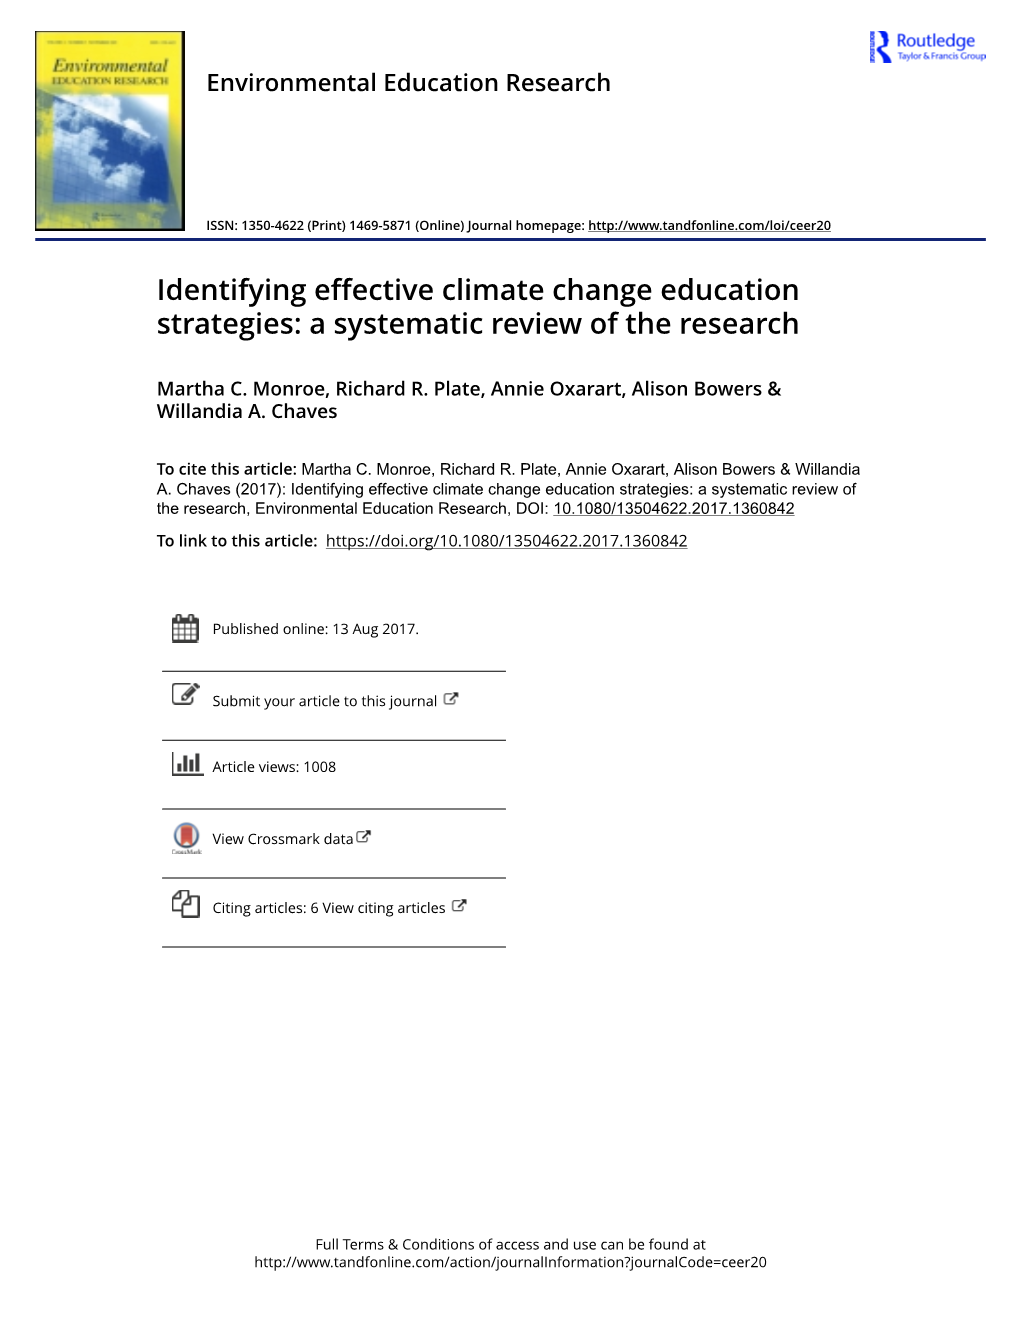 Identifying Effective Climate Change Education Strategies: a Systematic Review of the Research